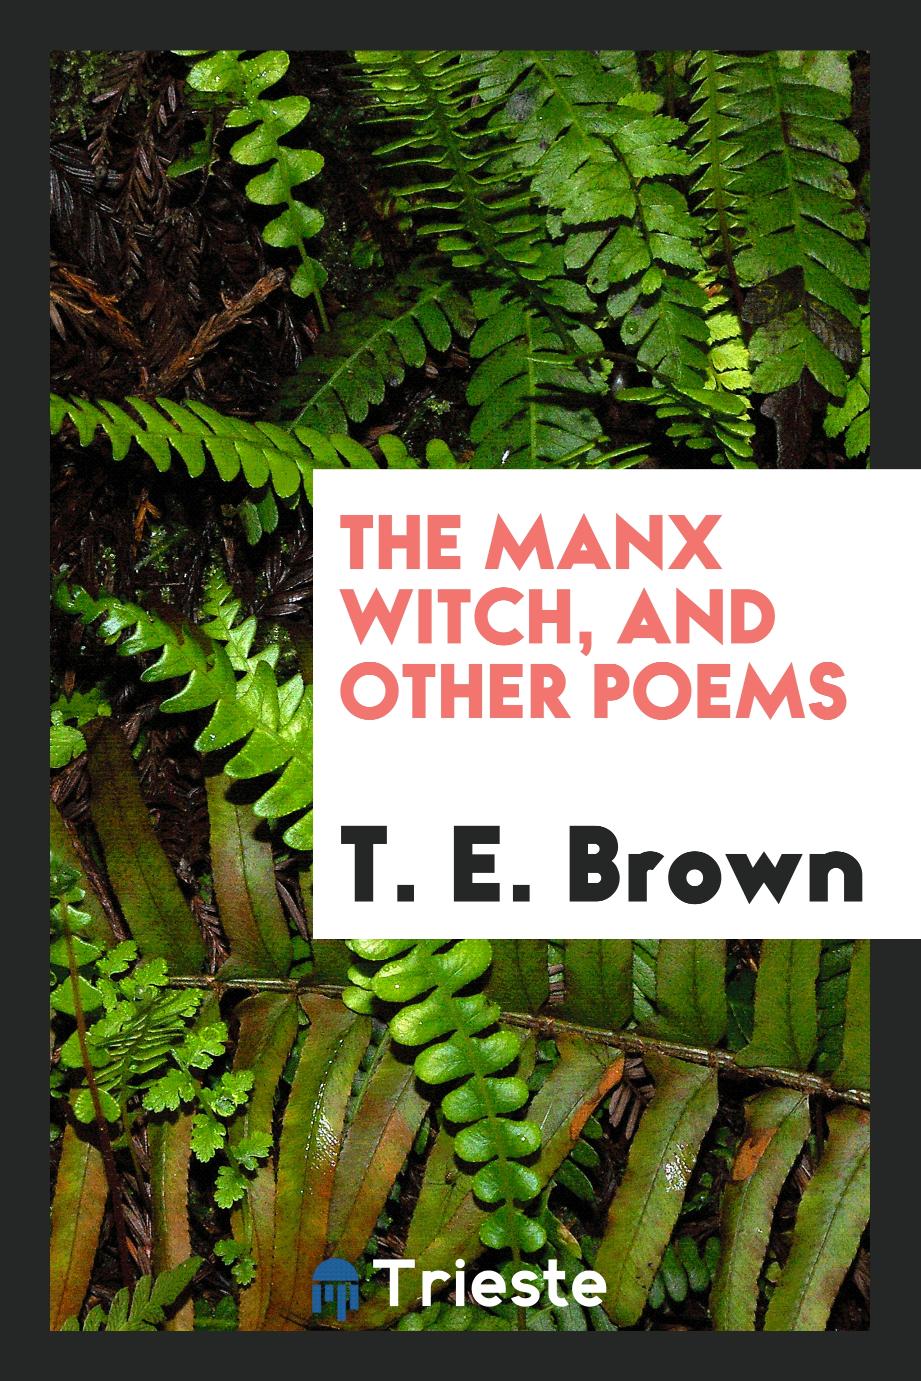 The Manx witch, and other poems